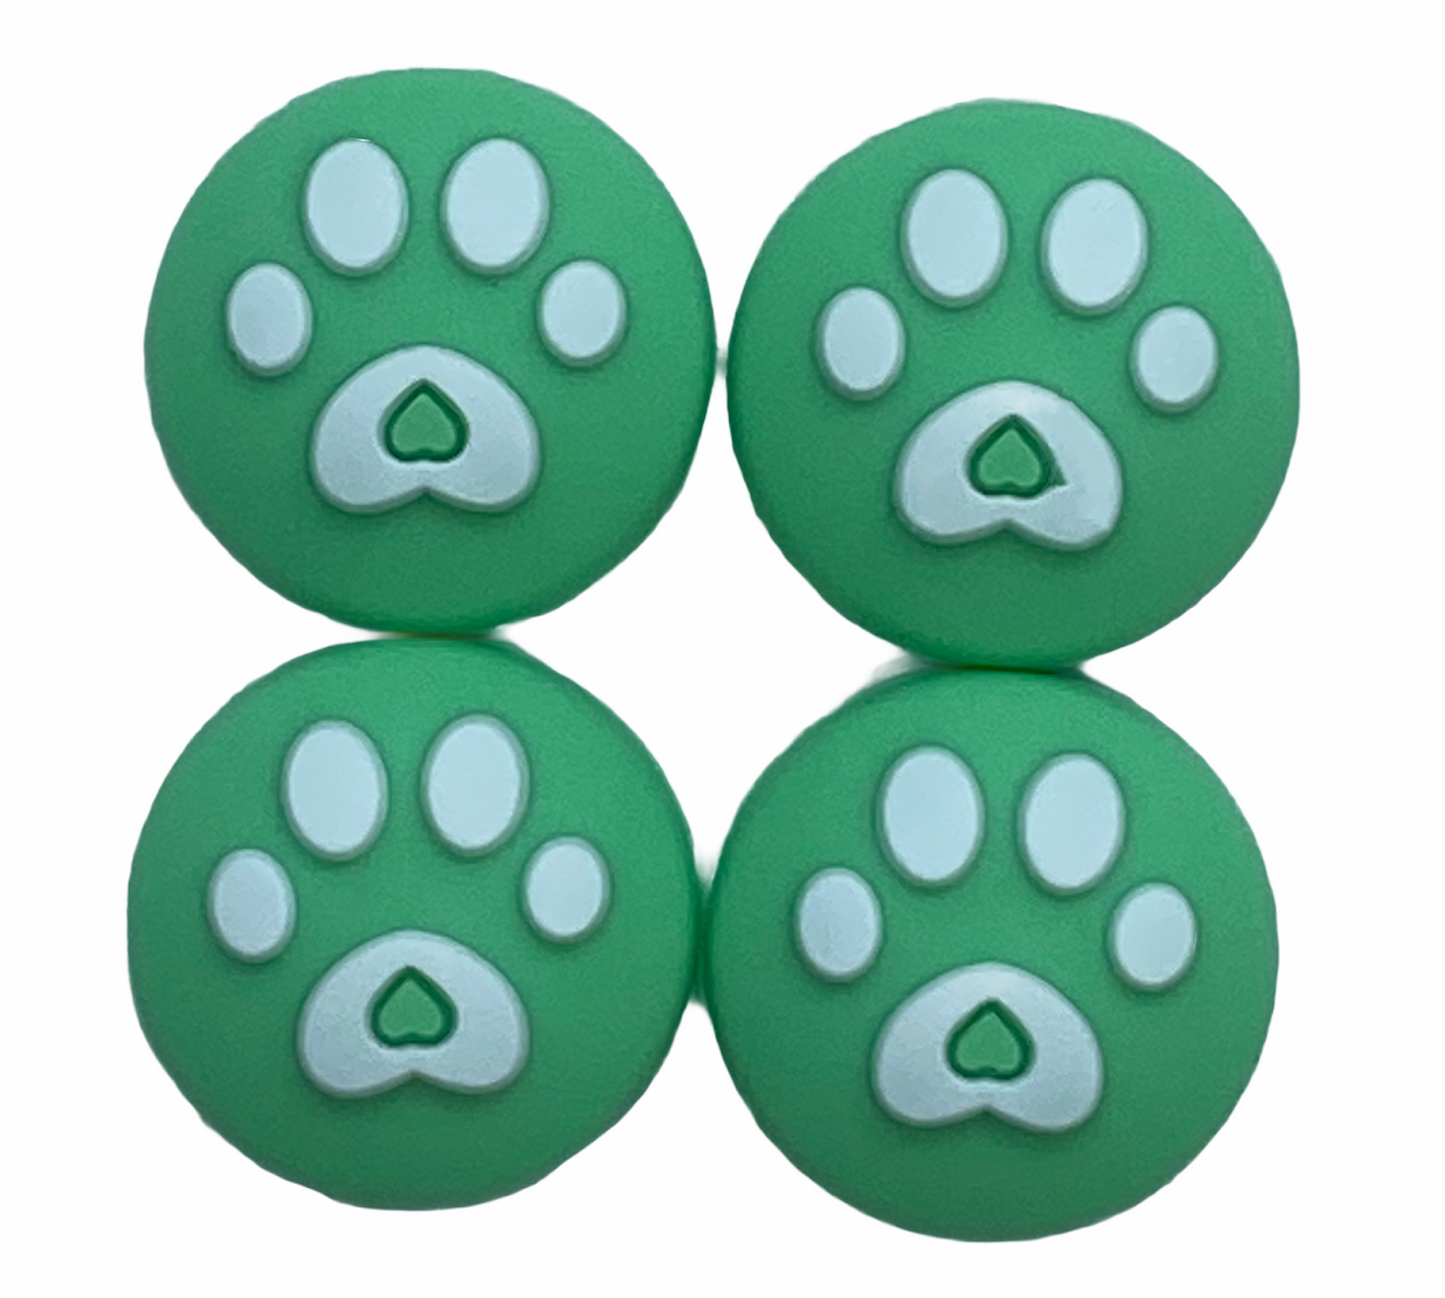 JenDore Green 4Pcs Paws Silicone Thumb Grip Caps for Nintendo Switch